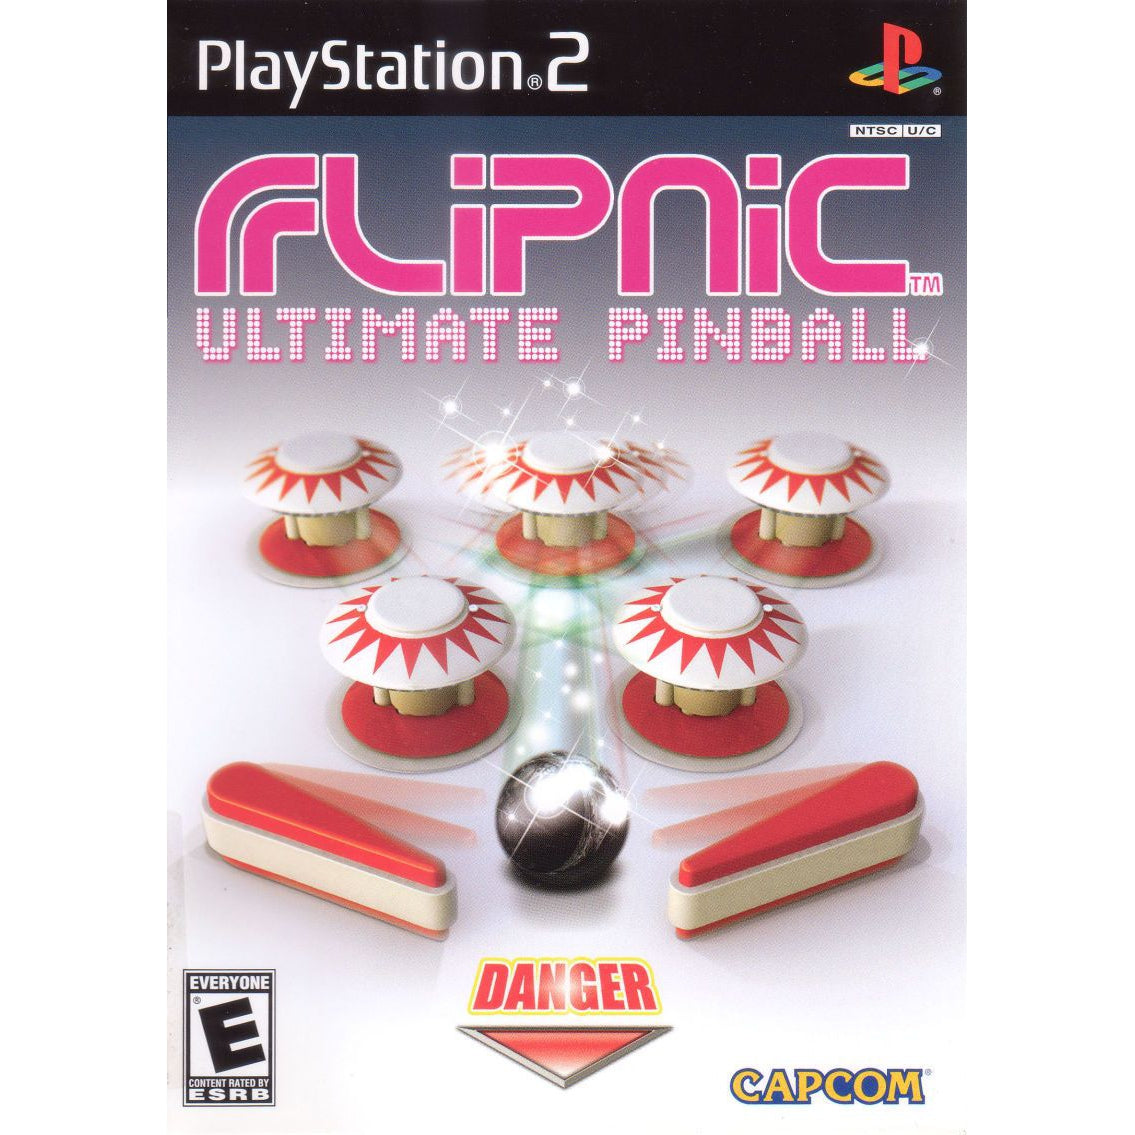 Flipnic: Ultimate Pinball  - PlayStation 2 (PS2) Game Complete - YourGamingShop.com - Buy, Sell, Trade Video Games Online. 120 Day Warranty. Satisfaction Guaranteed.